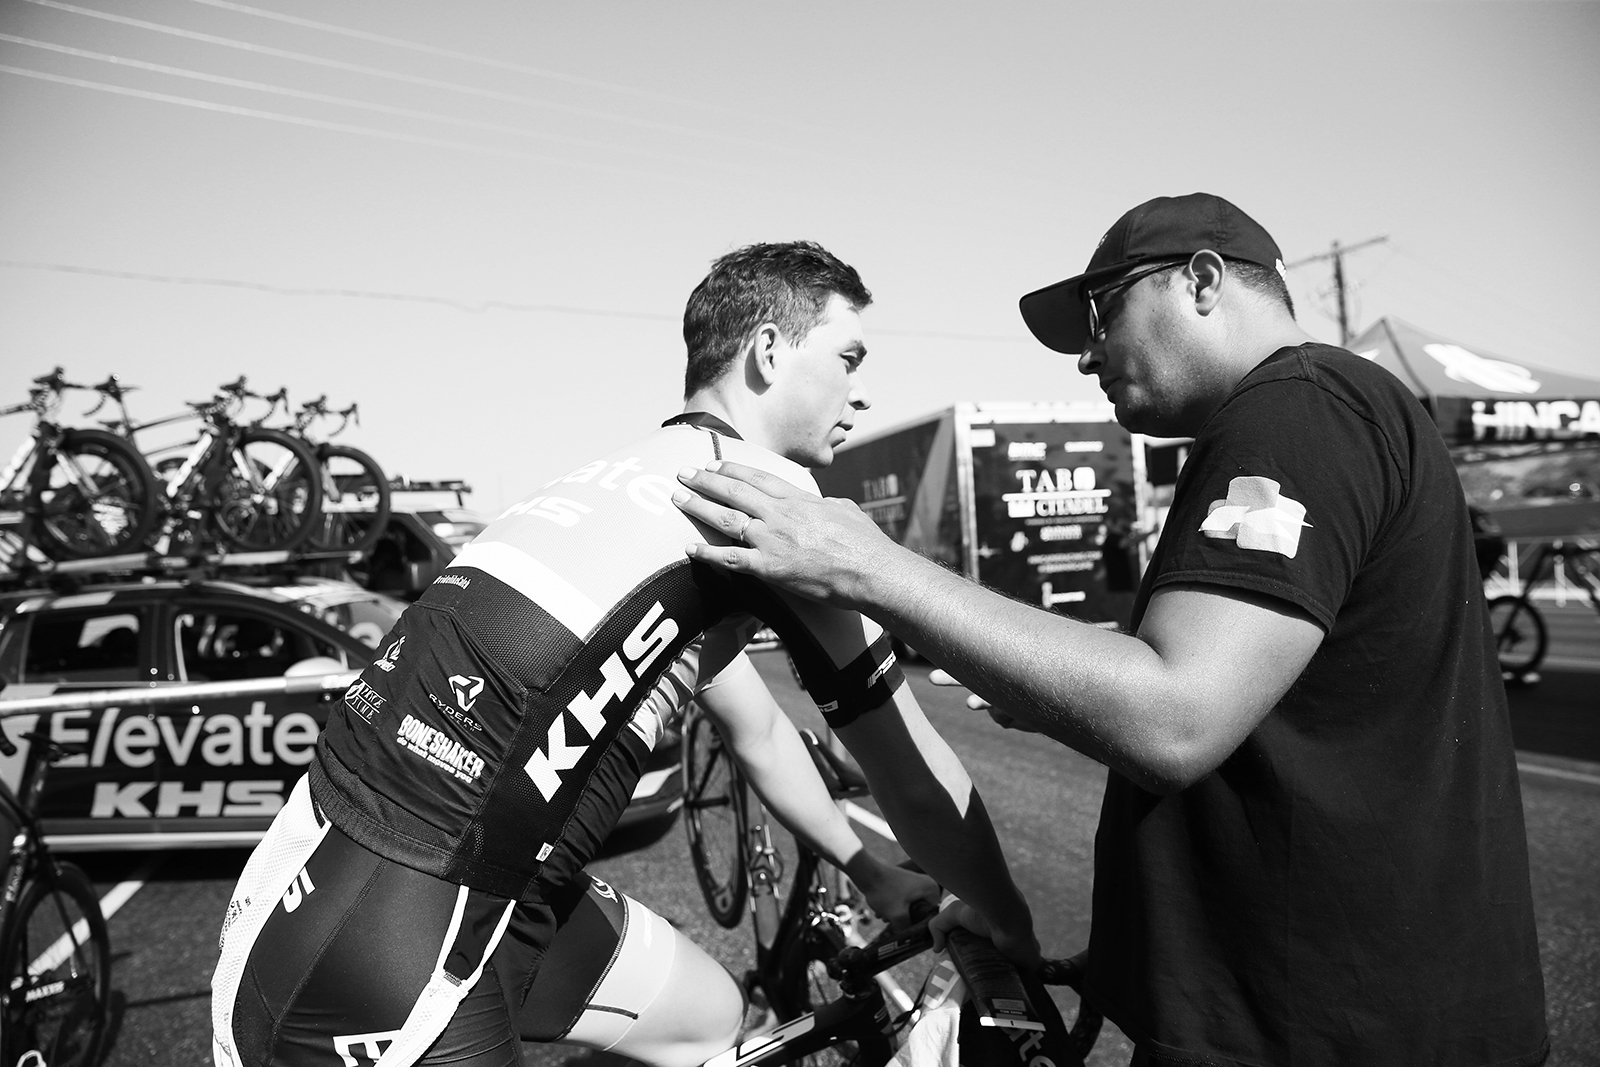 Pep talk. 2018 Tour of Utah Team Prologue, August 6, 2018, St. George, Utah. Photo by Cathy Fegan-Kim, cottonsoxphotography.net